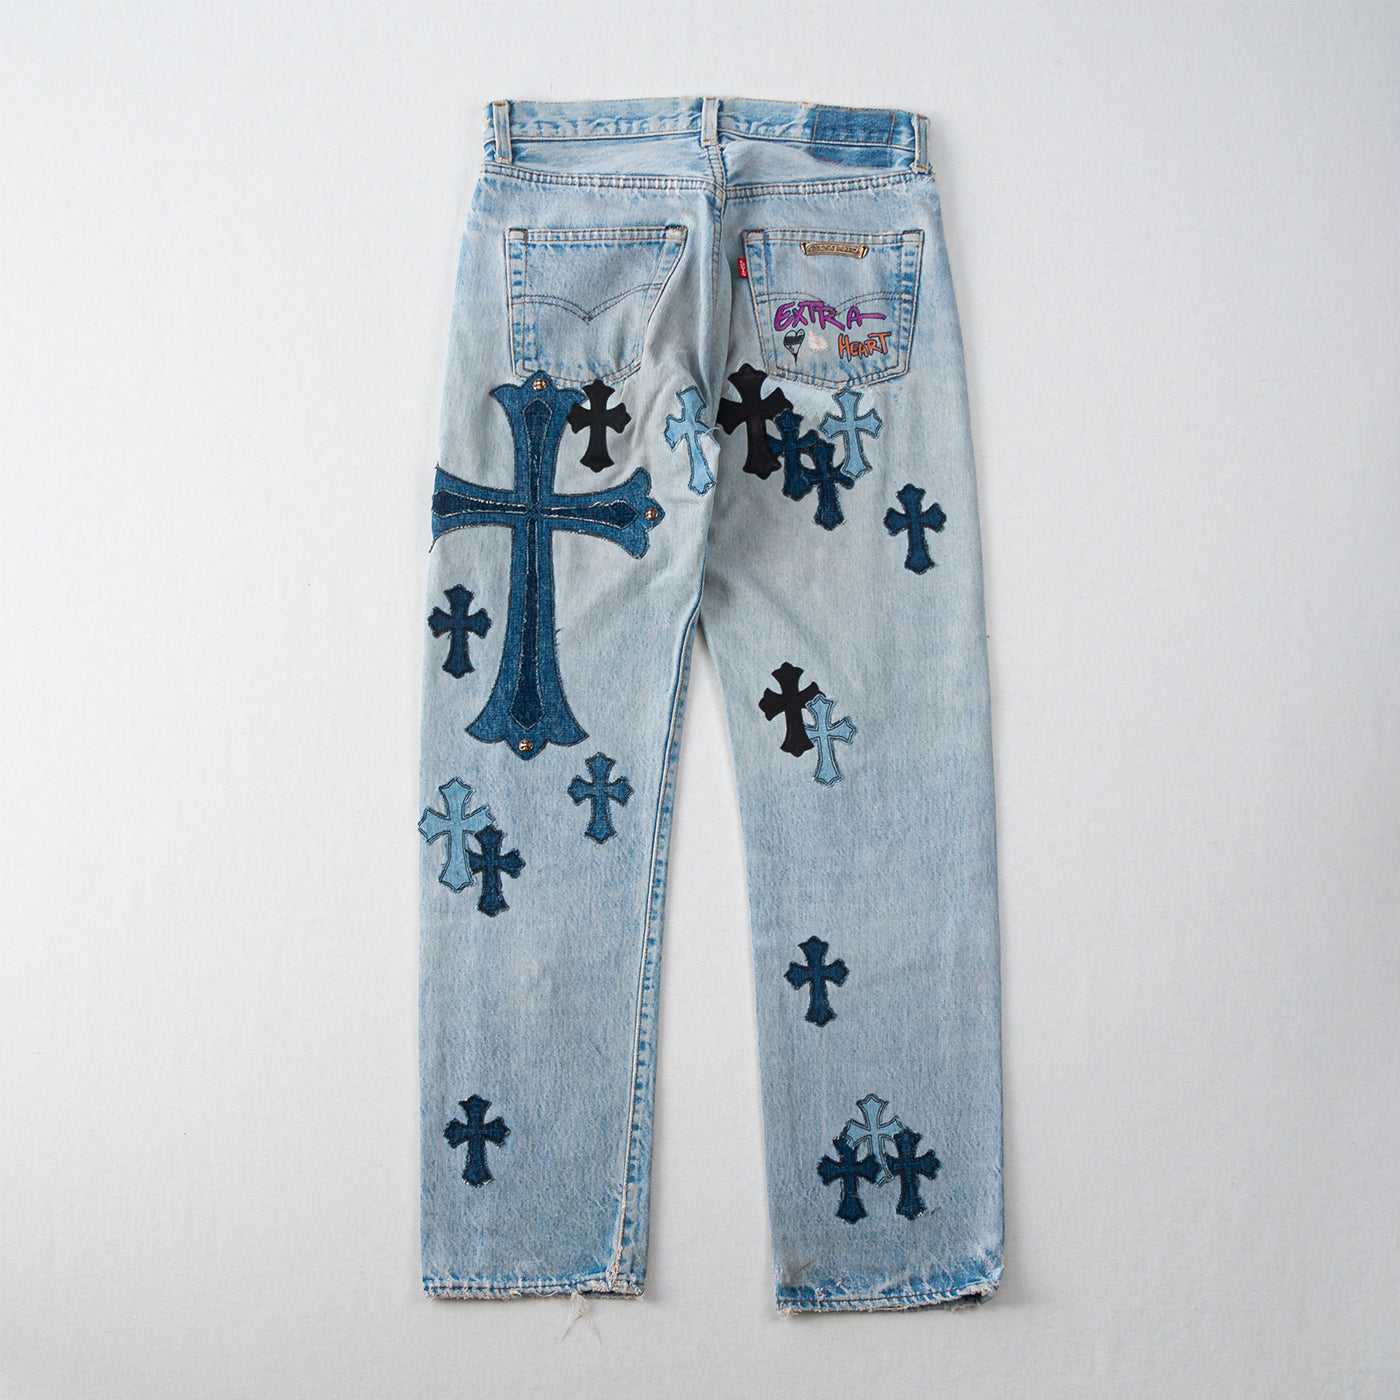 Chrome Hearts Multi-Colored Cross Patches Jeans